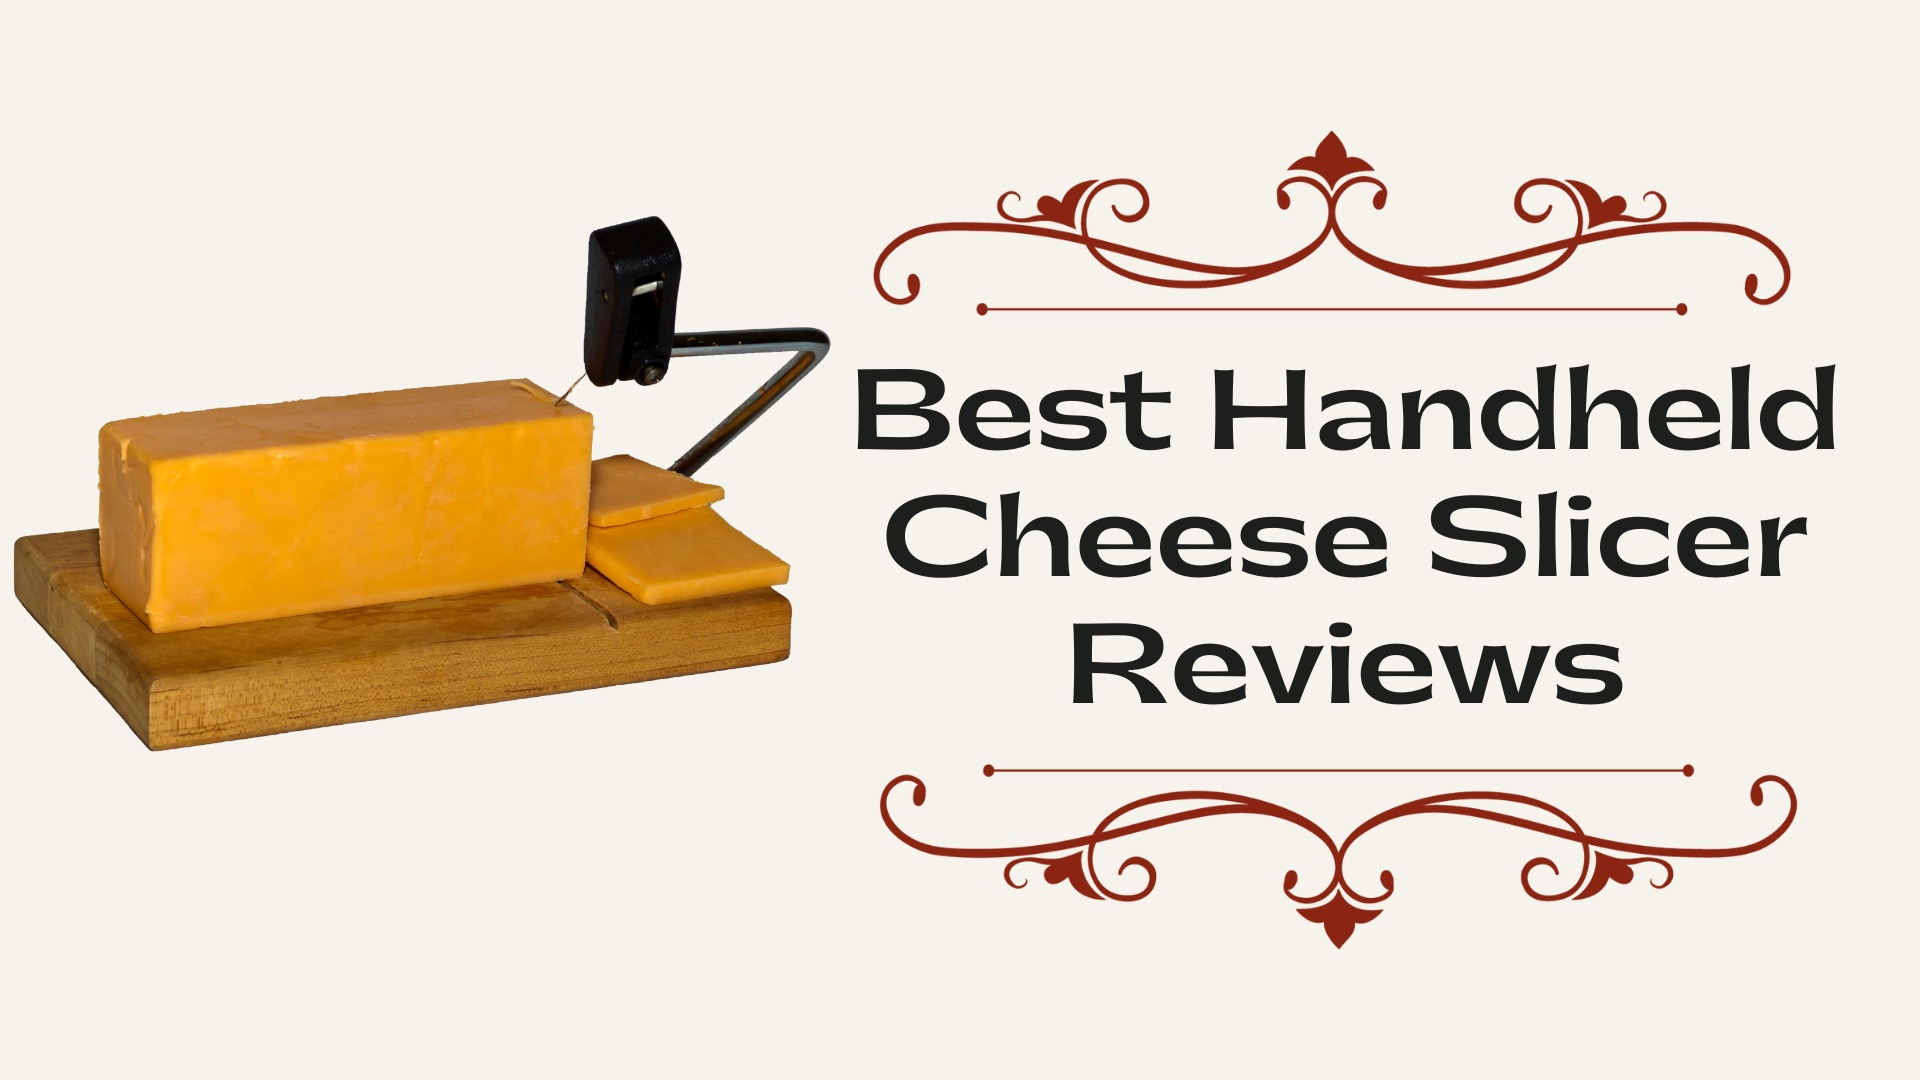 Best Handheld Cheese Slicer Reviews for Heavy Duty